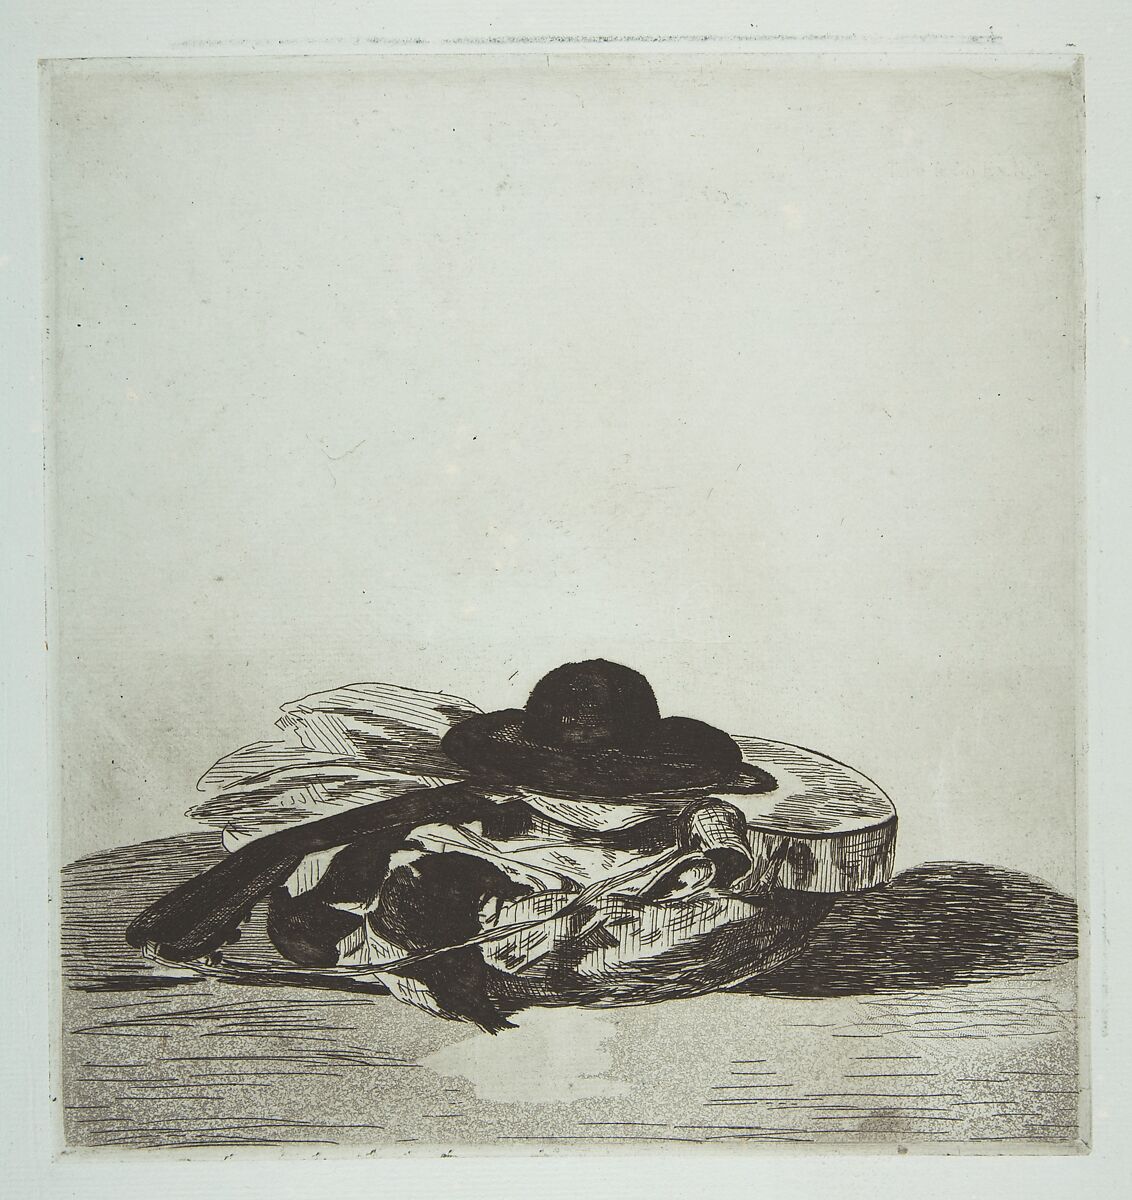 Hat and Guitar. Cover design for "Eaux-fortes par Edouard Manet," an album of fourteen etchings, Edouard Manet (French, Paris 1832–1883 Paris), Etching, drypoint, and aquatint; final state on blue laid paper 